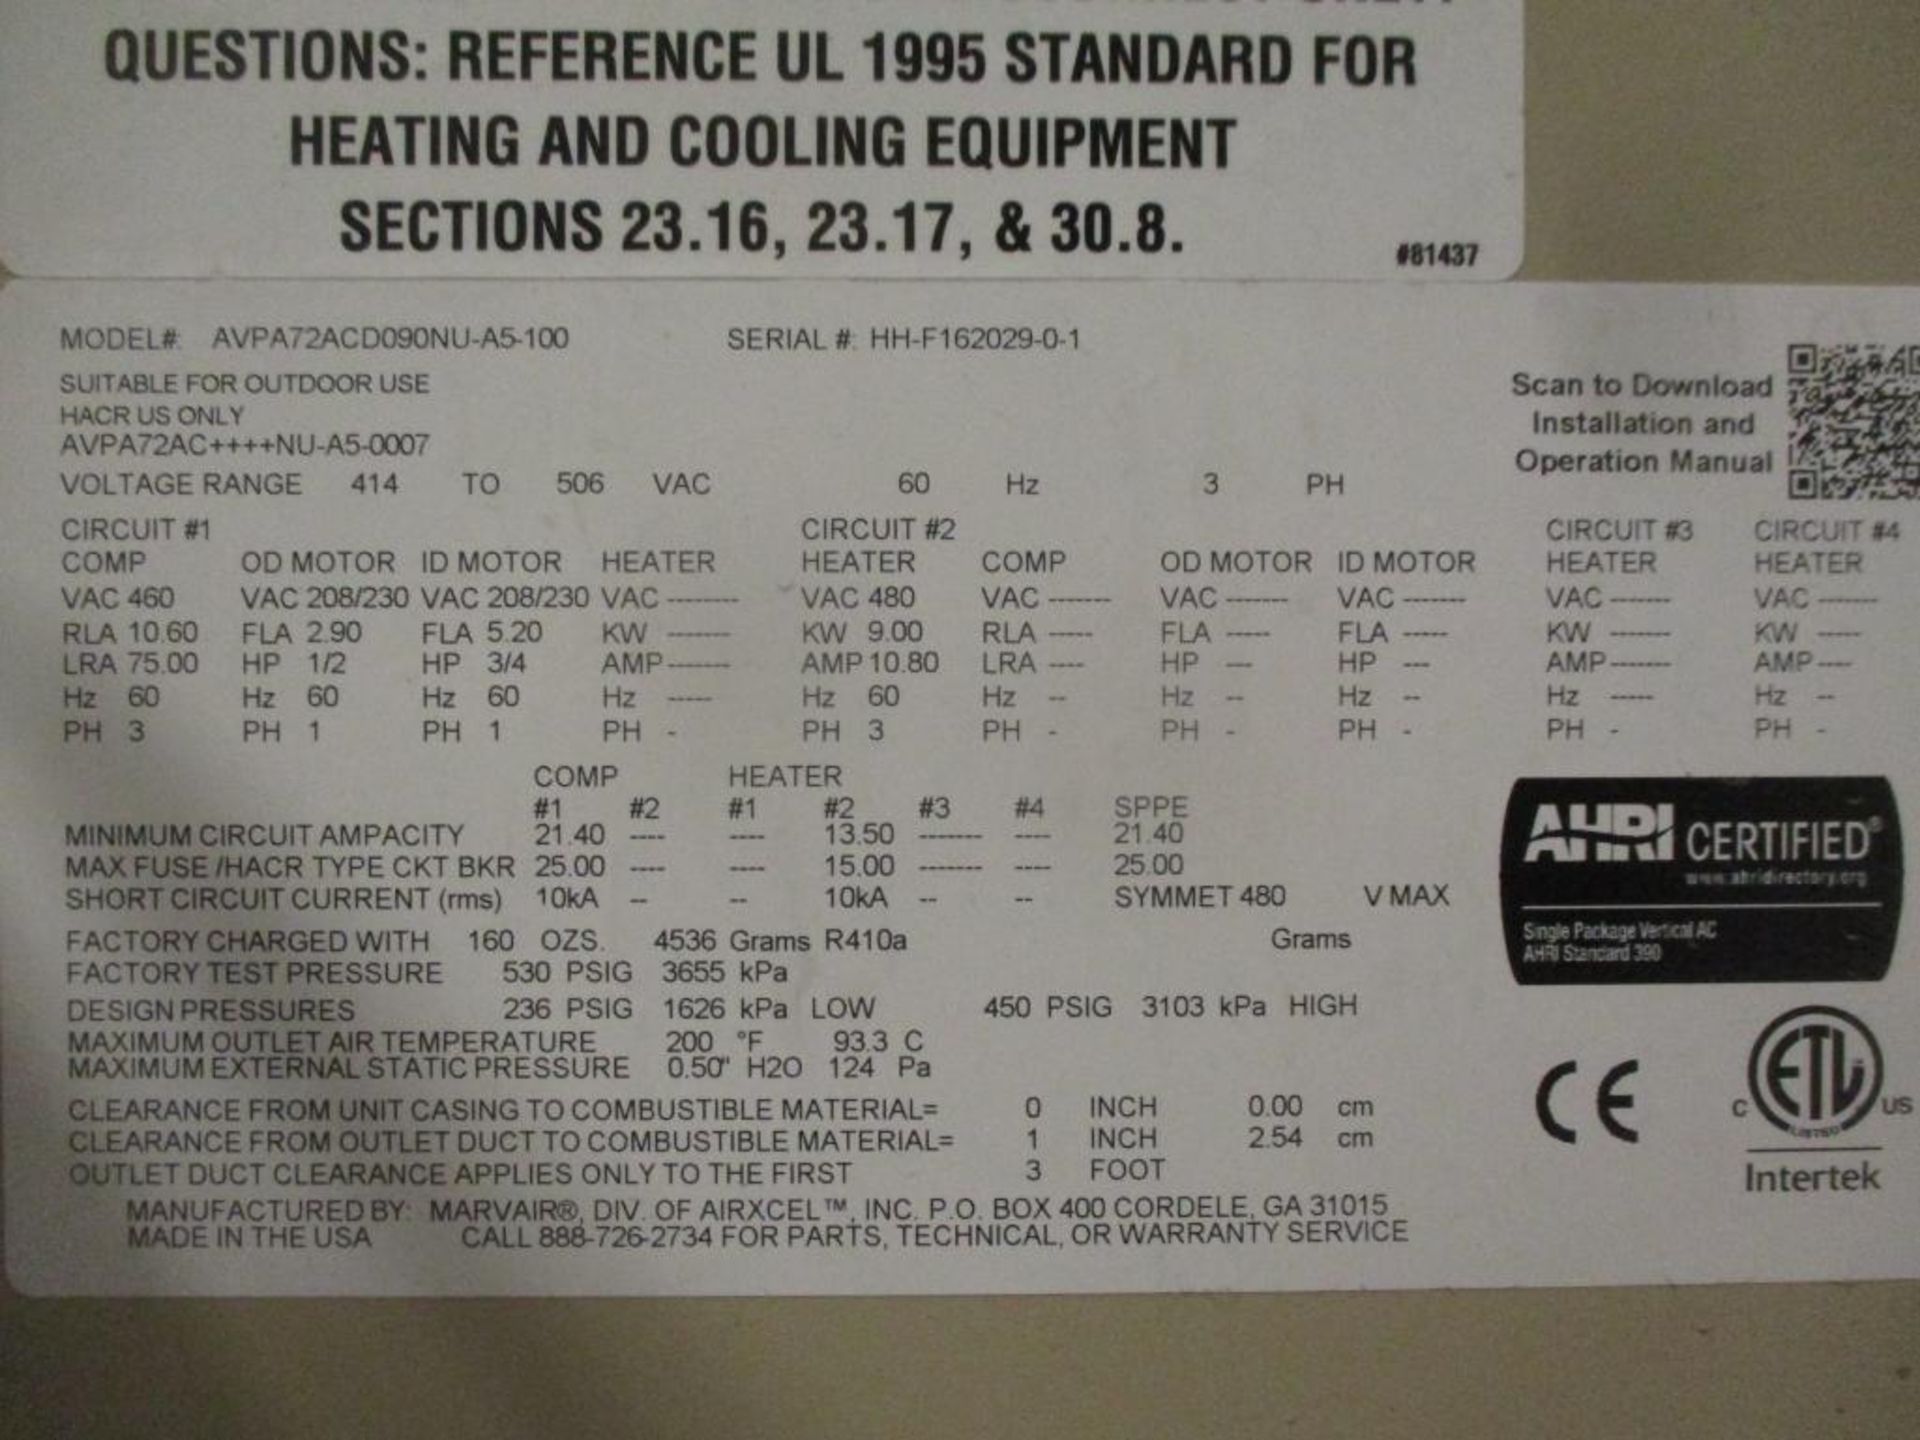 Airxcel Marvair ComPac I Heater, Model AVPA72ACD090NU-A5-100 (New) - Image 4 of 4